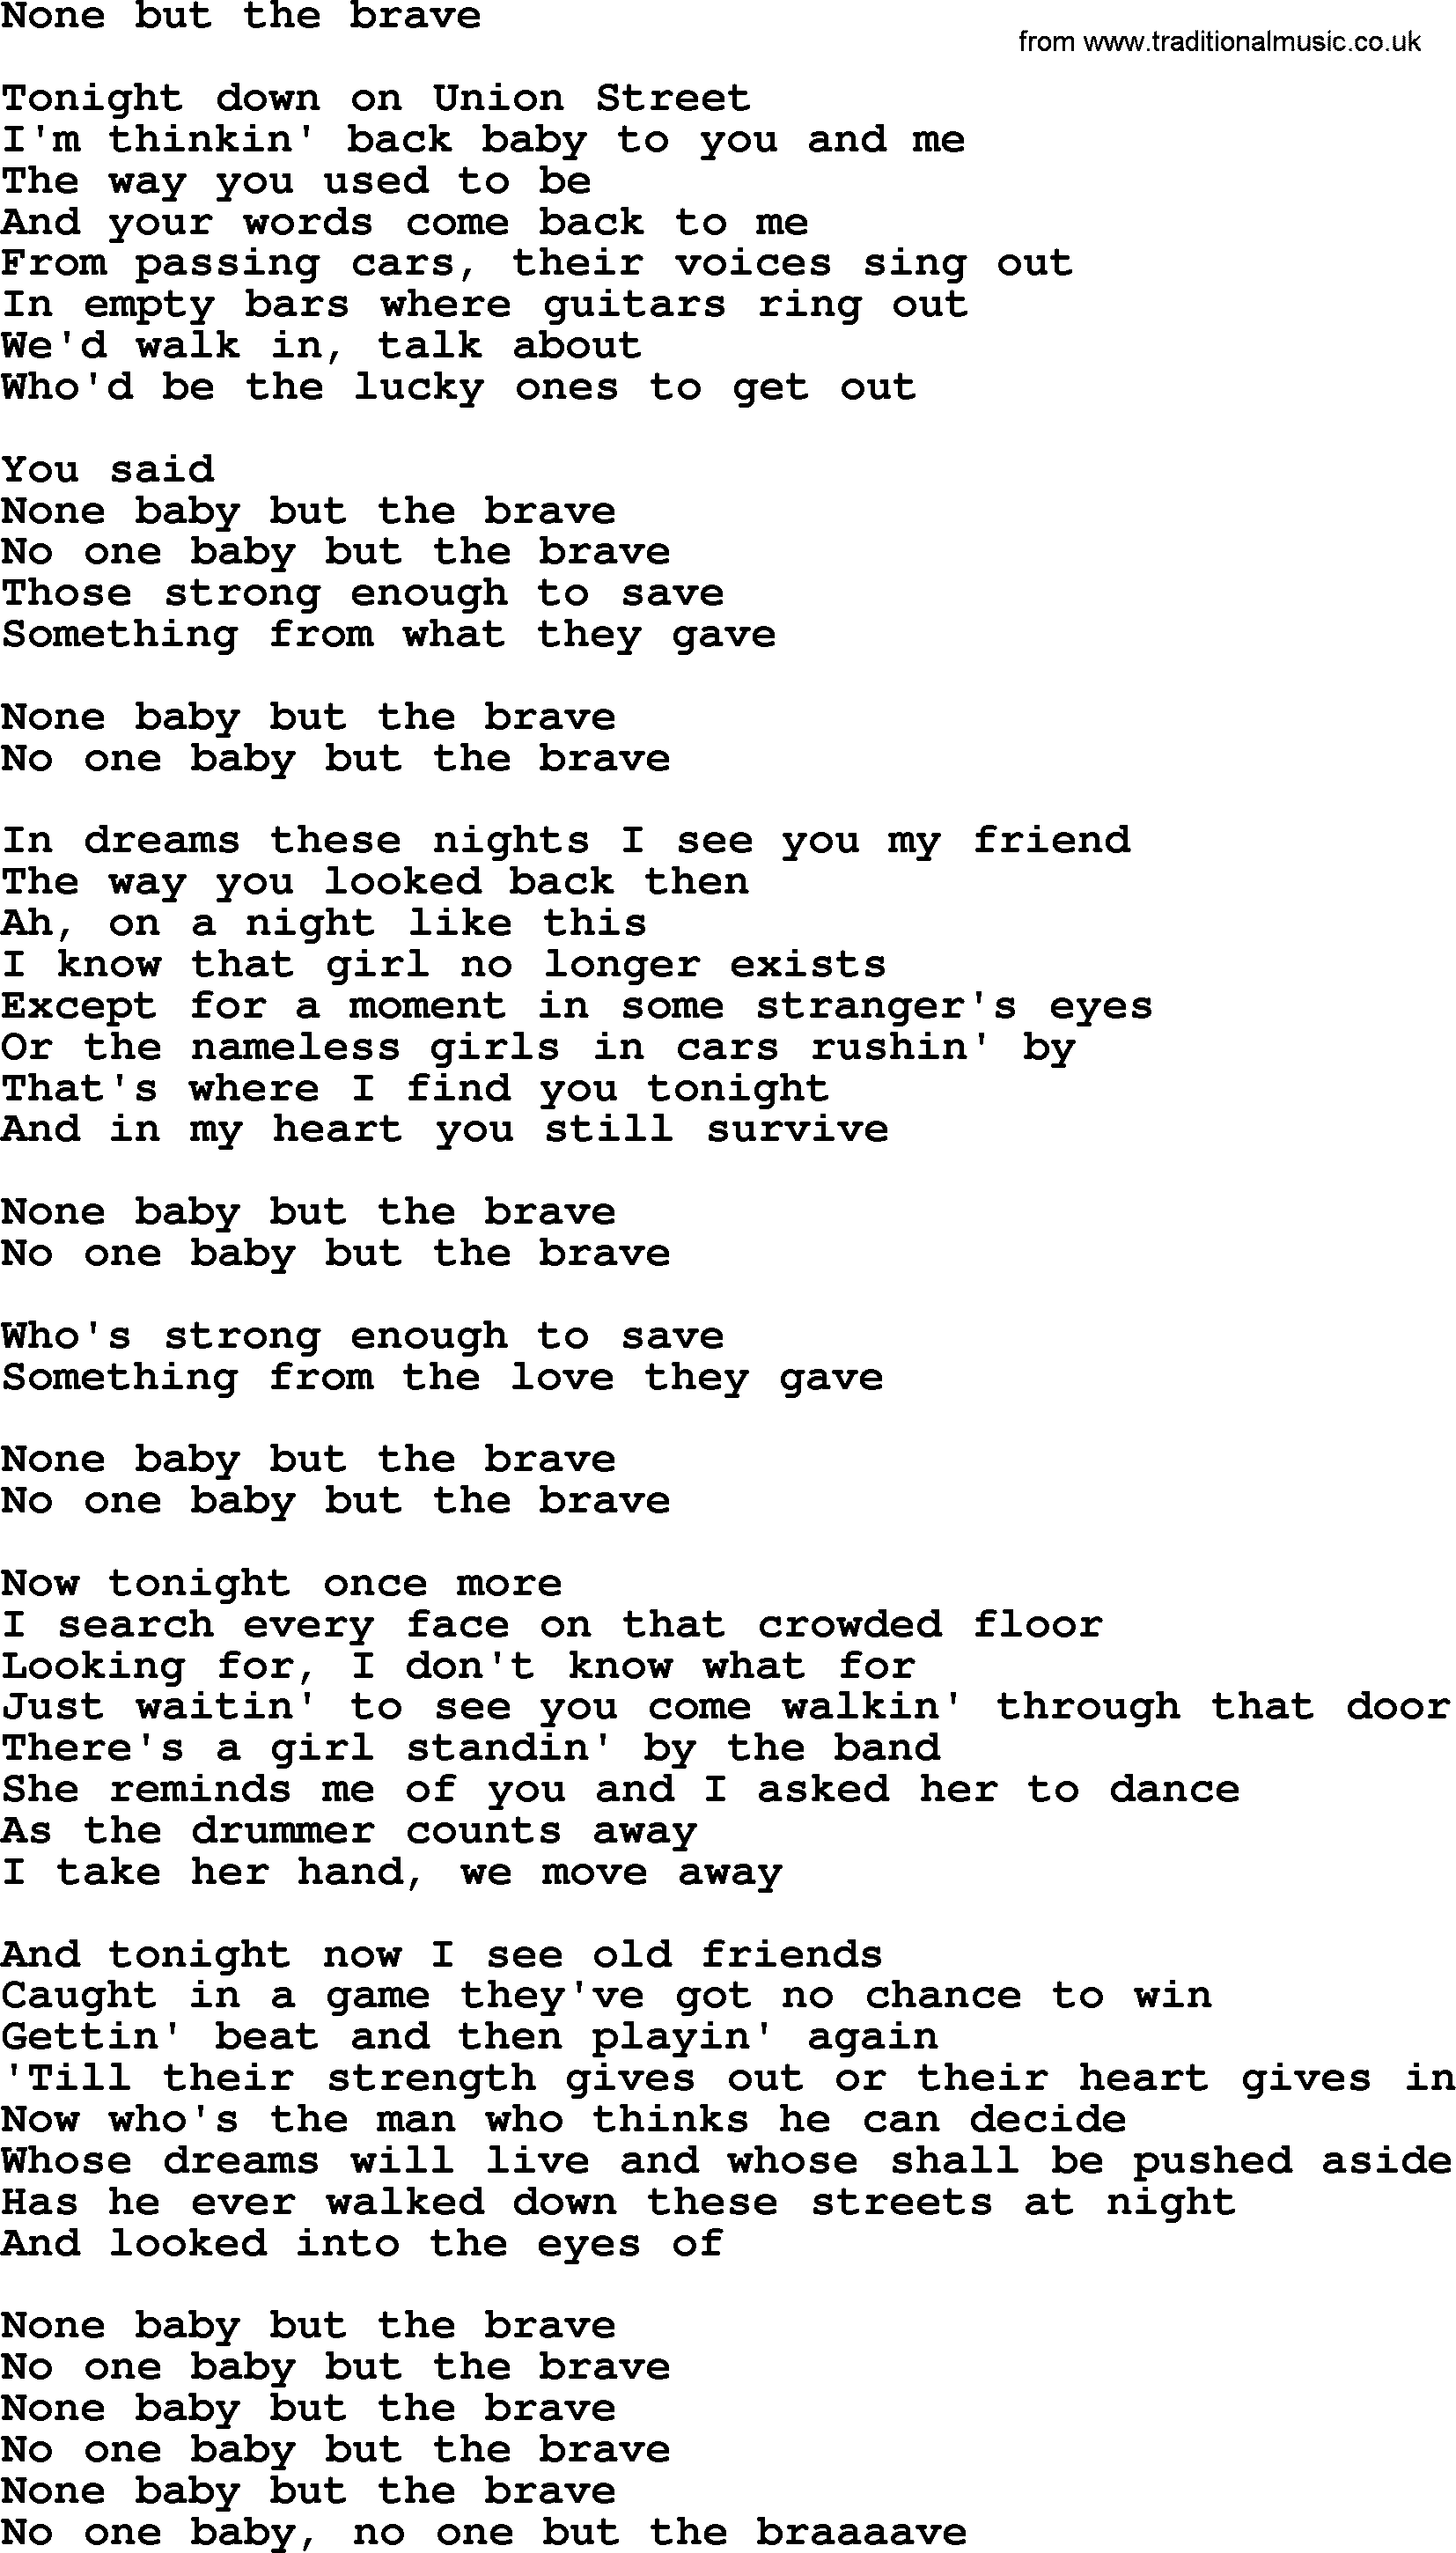 Bruce Springsteen song: None But The Brave lyrics